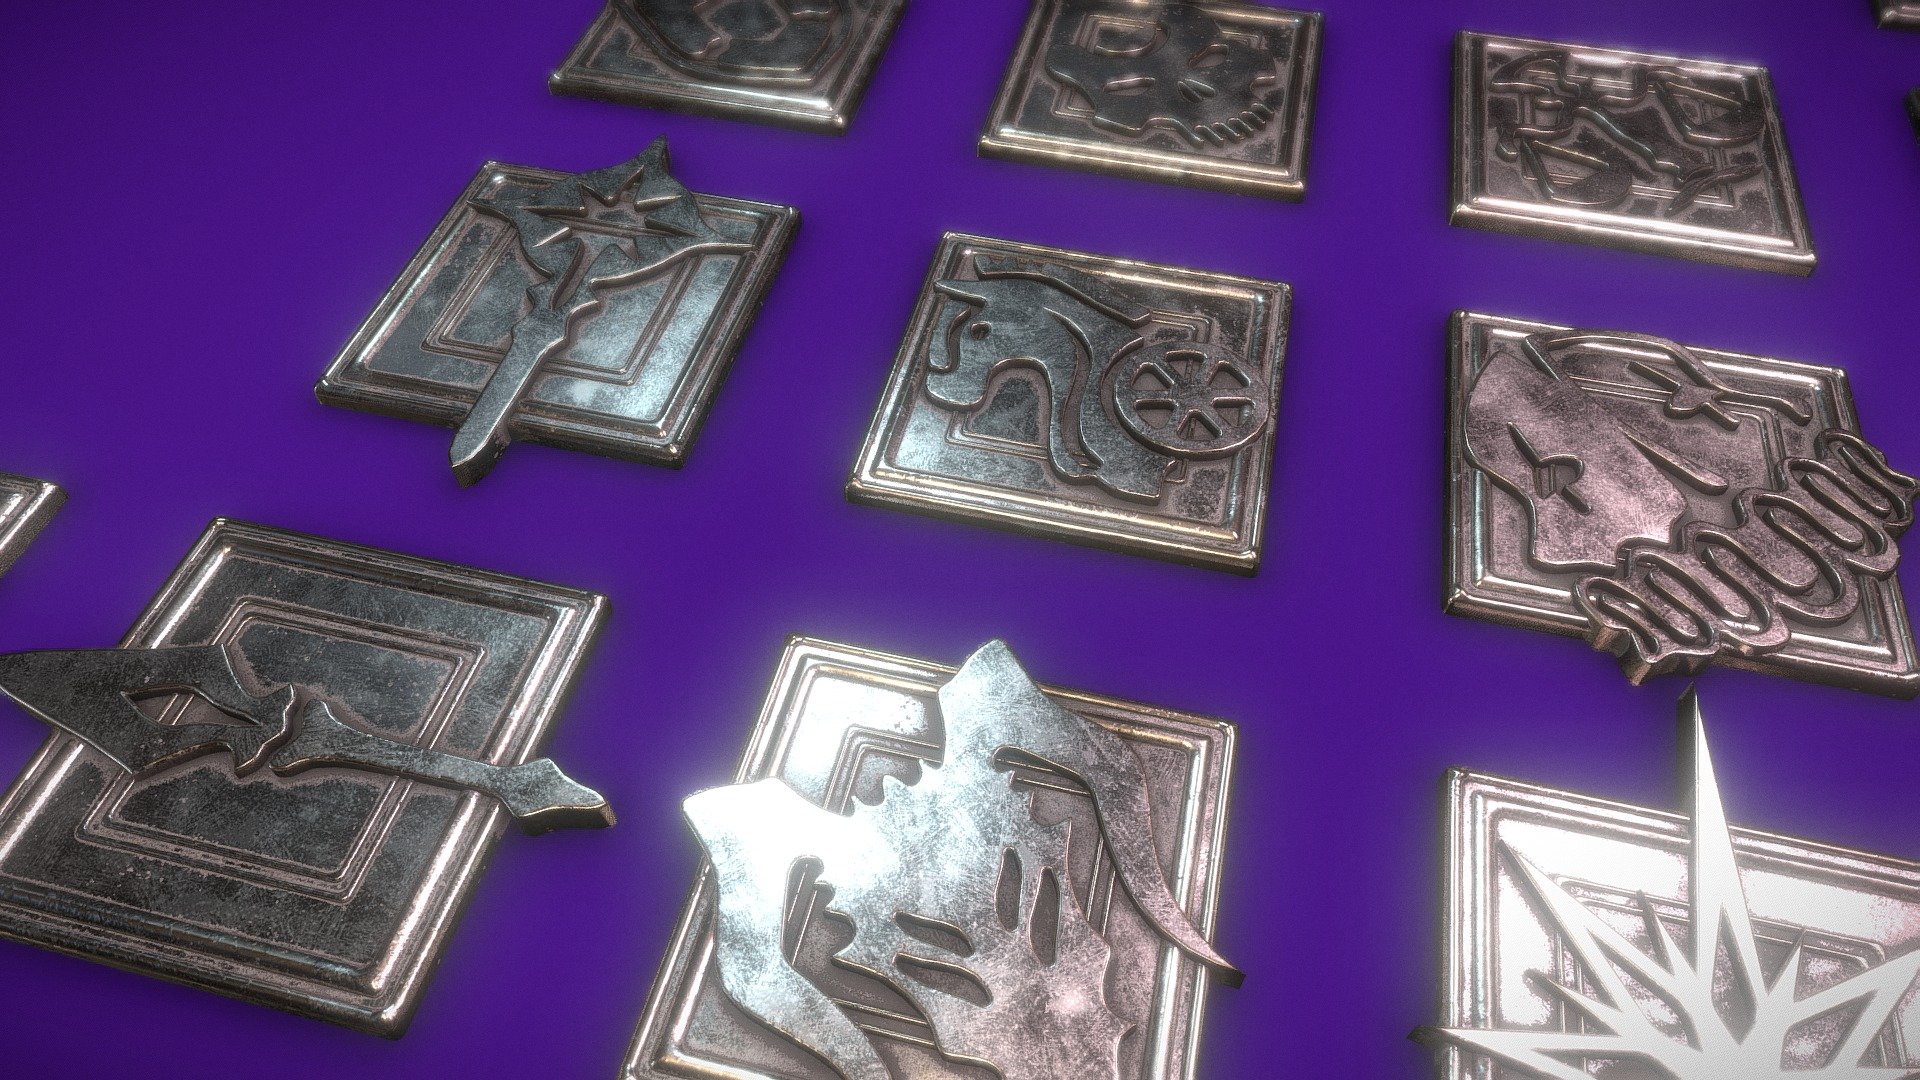 The servants class emblems from Fate/Grand Order

STL model print ready

This model have PBR and VRay textures of the gold, copper, silver and normal versions of the emblems, but the model isn't optimized 3d model